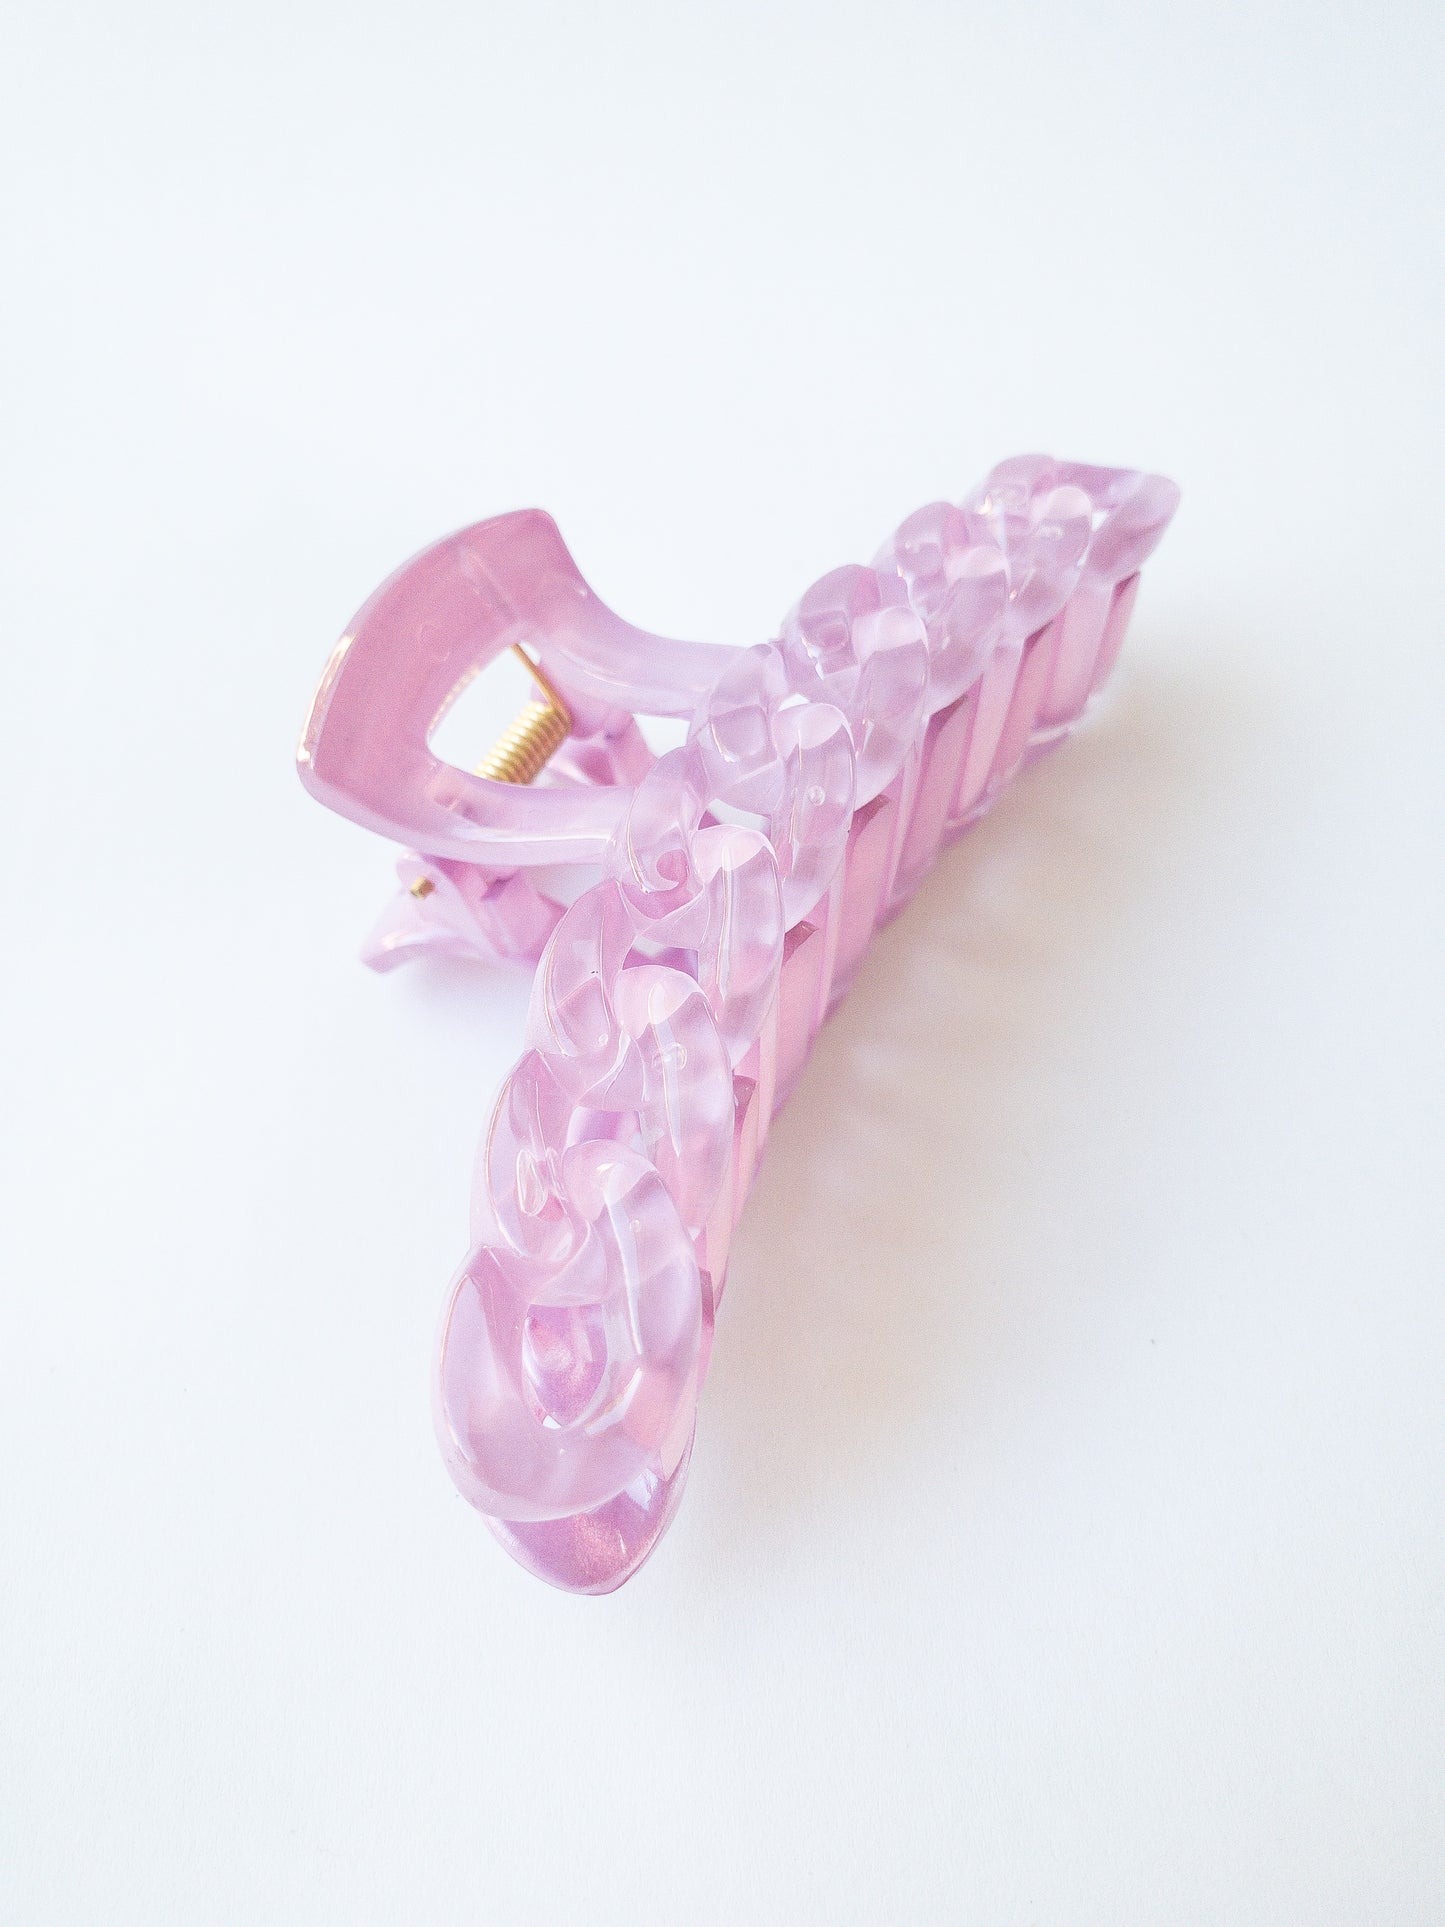 The brightest chain link hair claw clip in the most delectable candy hue! This purple hair claw is large in size and strong enough to sweep up your hair in a messy updo. You're going to want one in every color!